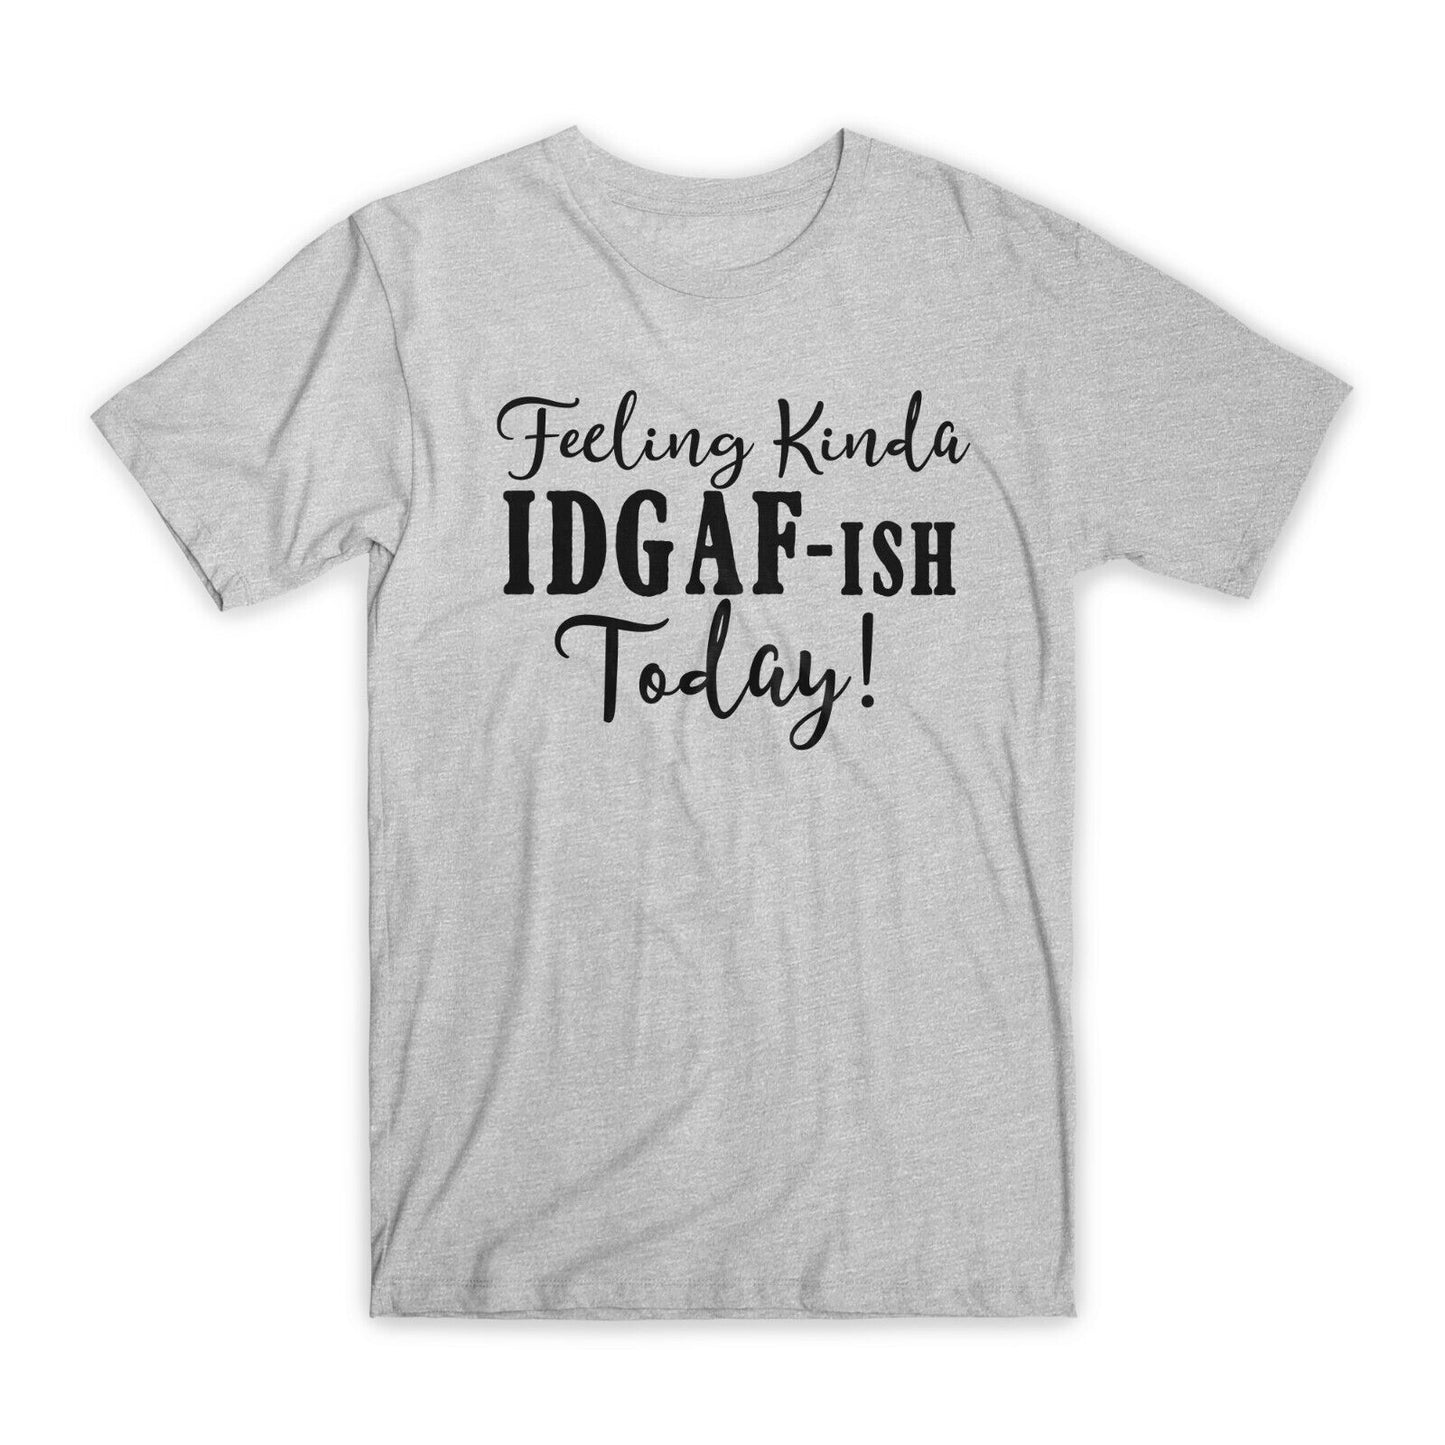 Feeling Kind A Idgaf-Ish Today T-Shirt Premium Soft Cotton Funny Tees Gifts NEW